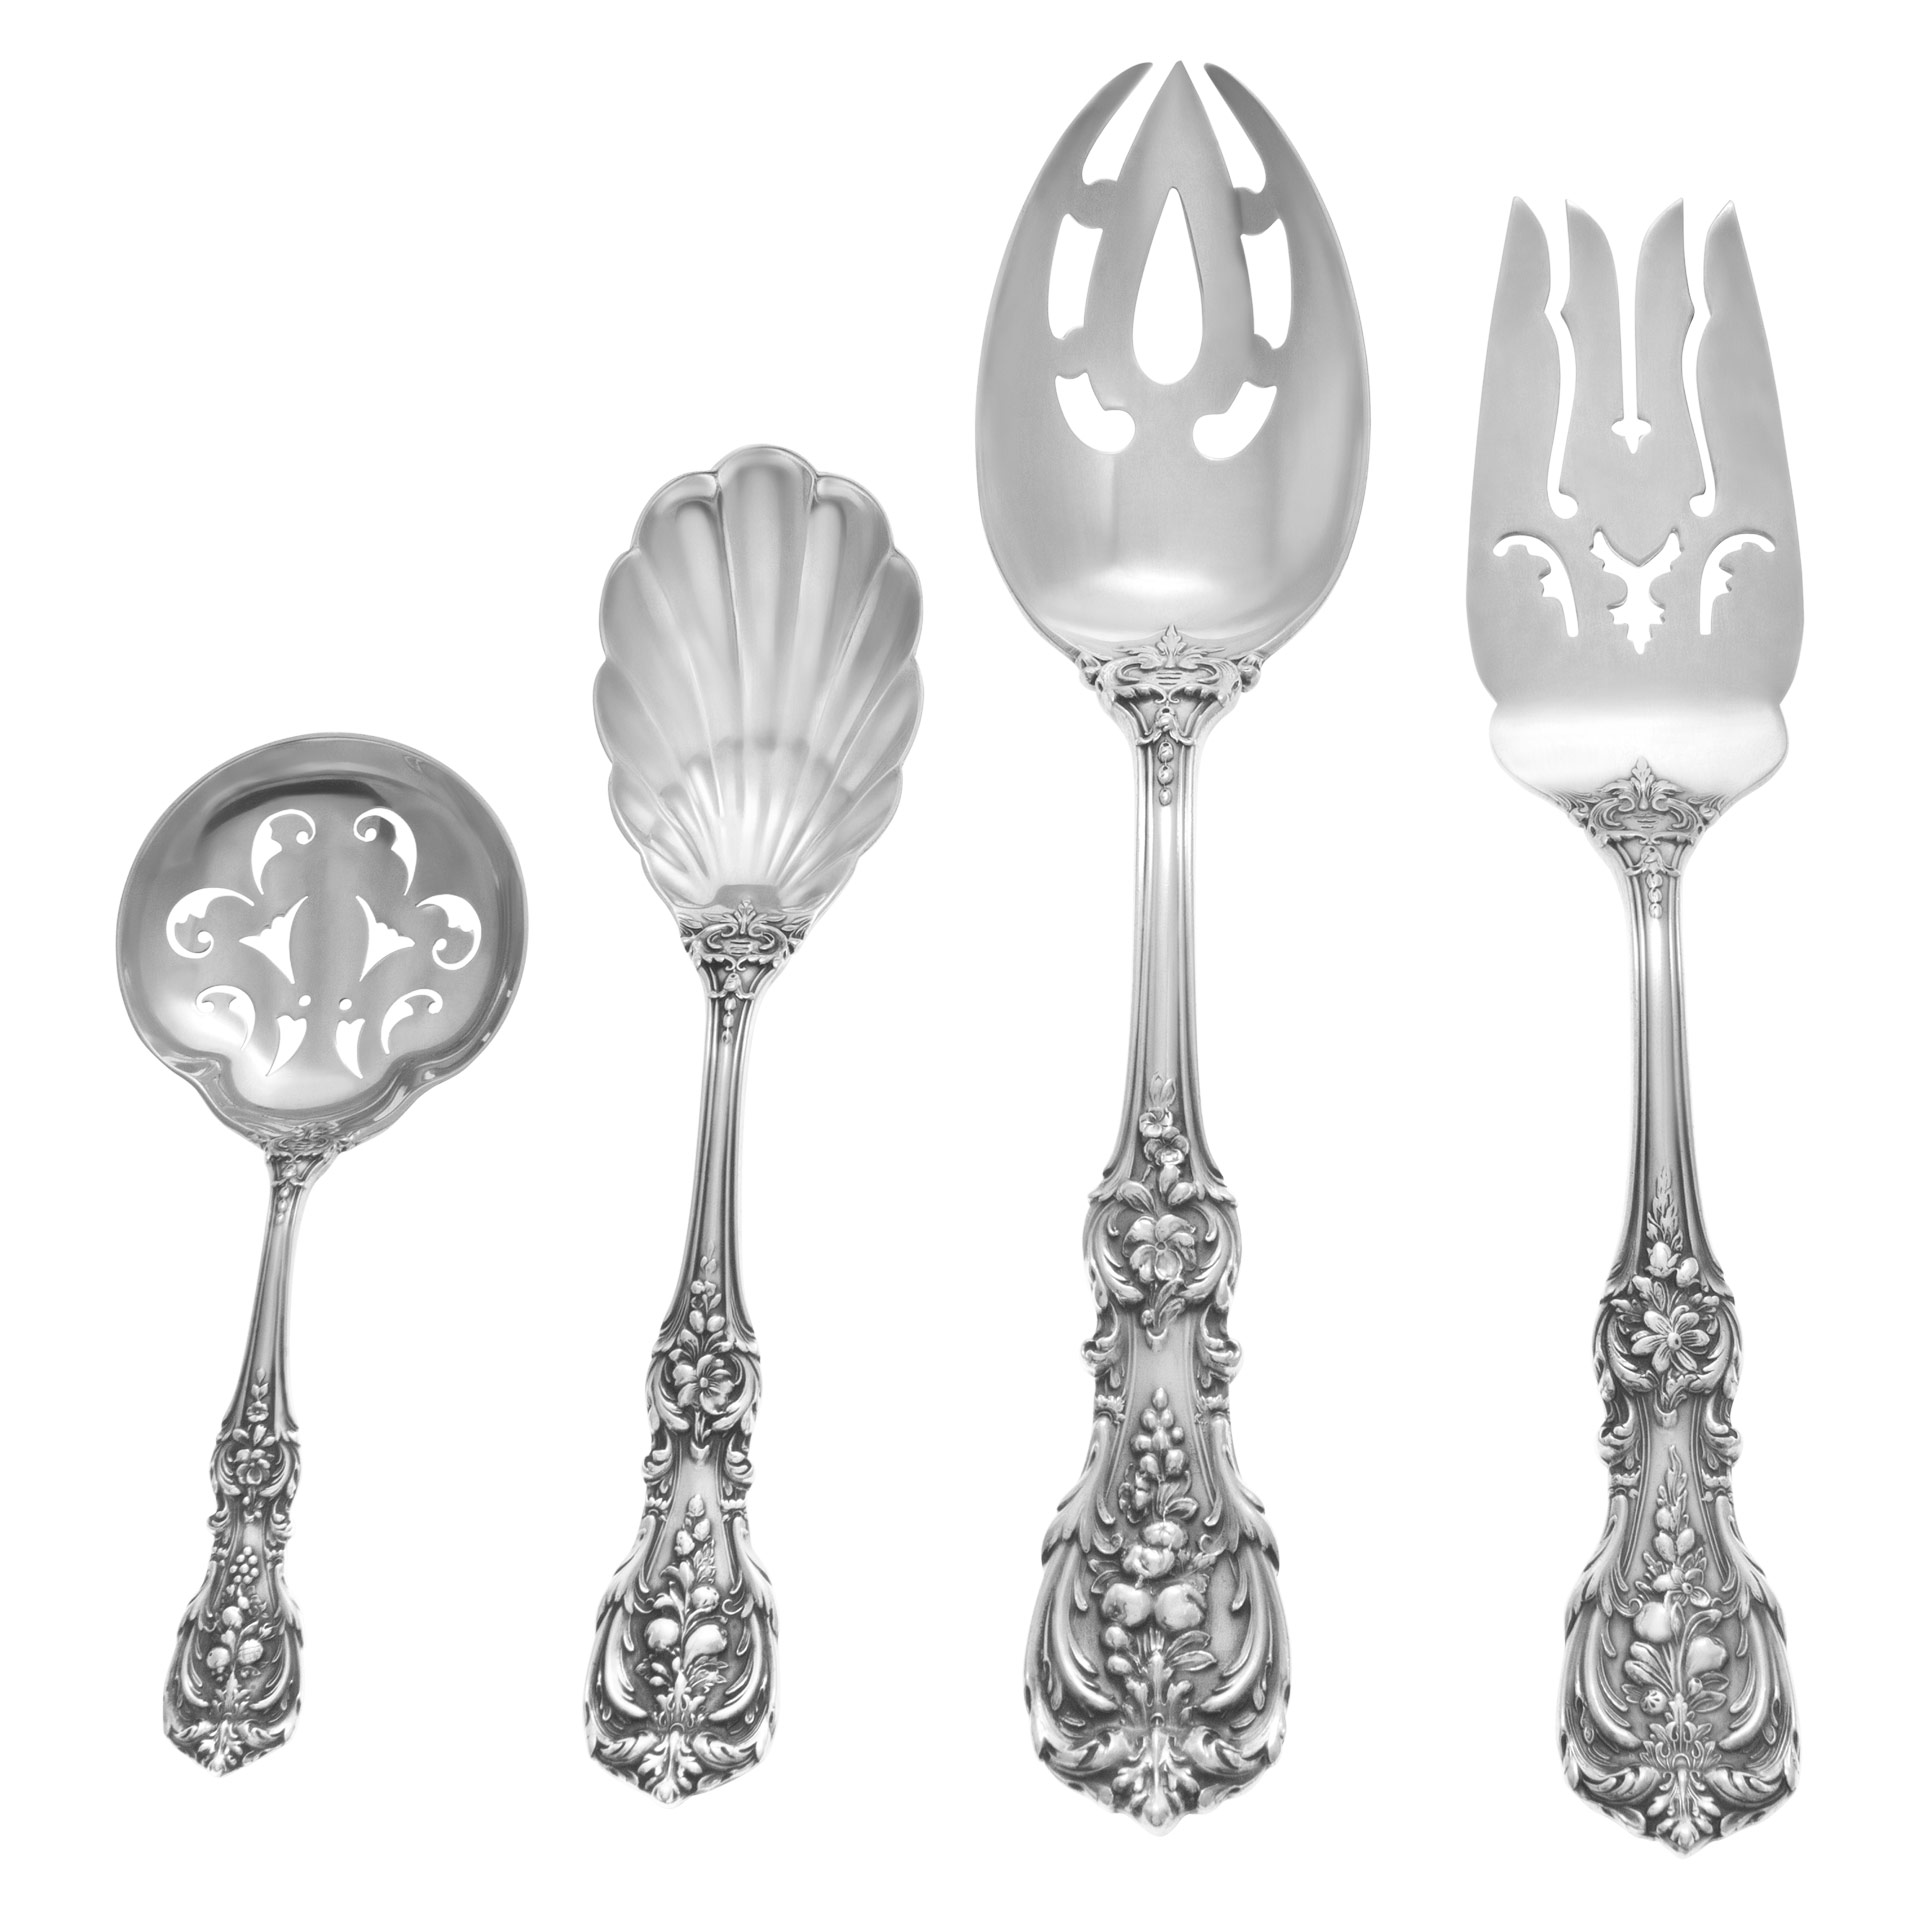 FRANCIS THE FIRST sterling silver flatware set patented in 1907 by Reed & Barton- TOTAL 58 PIECES- 4 place set for 10 (with xtras) and 5 serving pieces. image 3